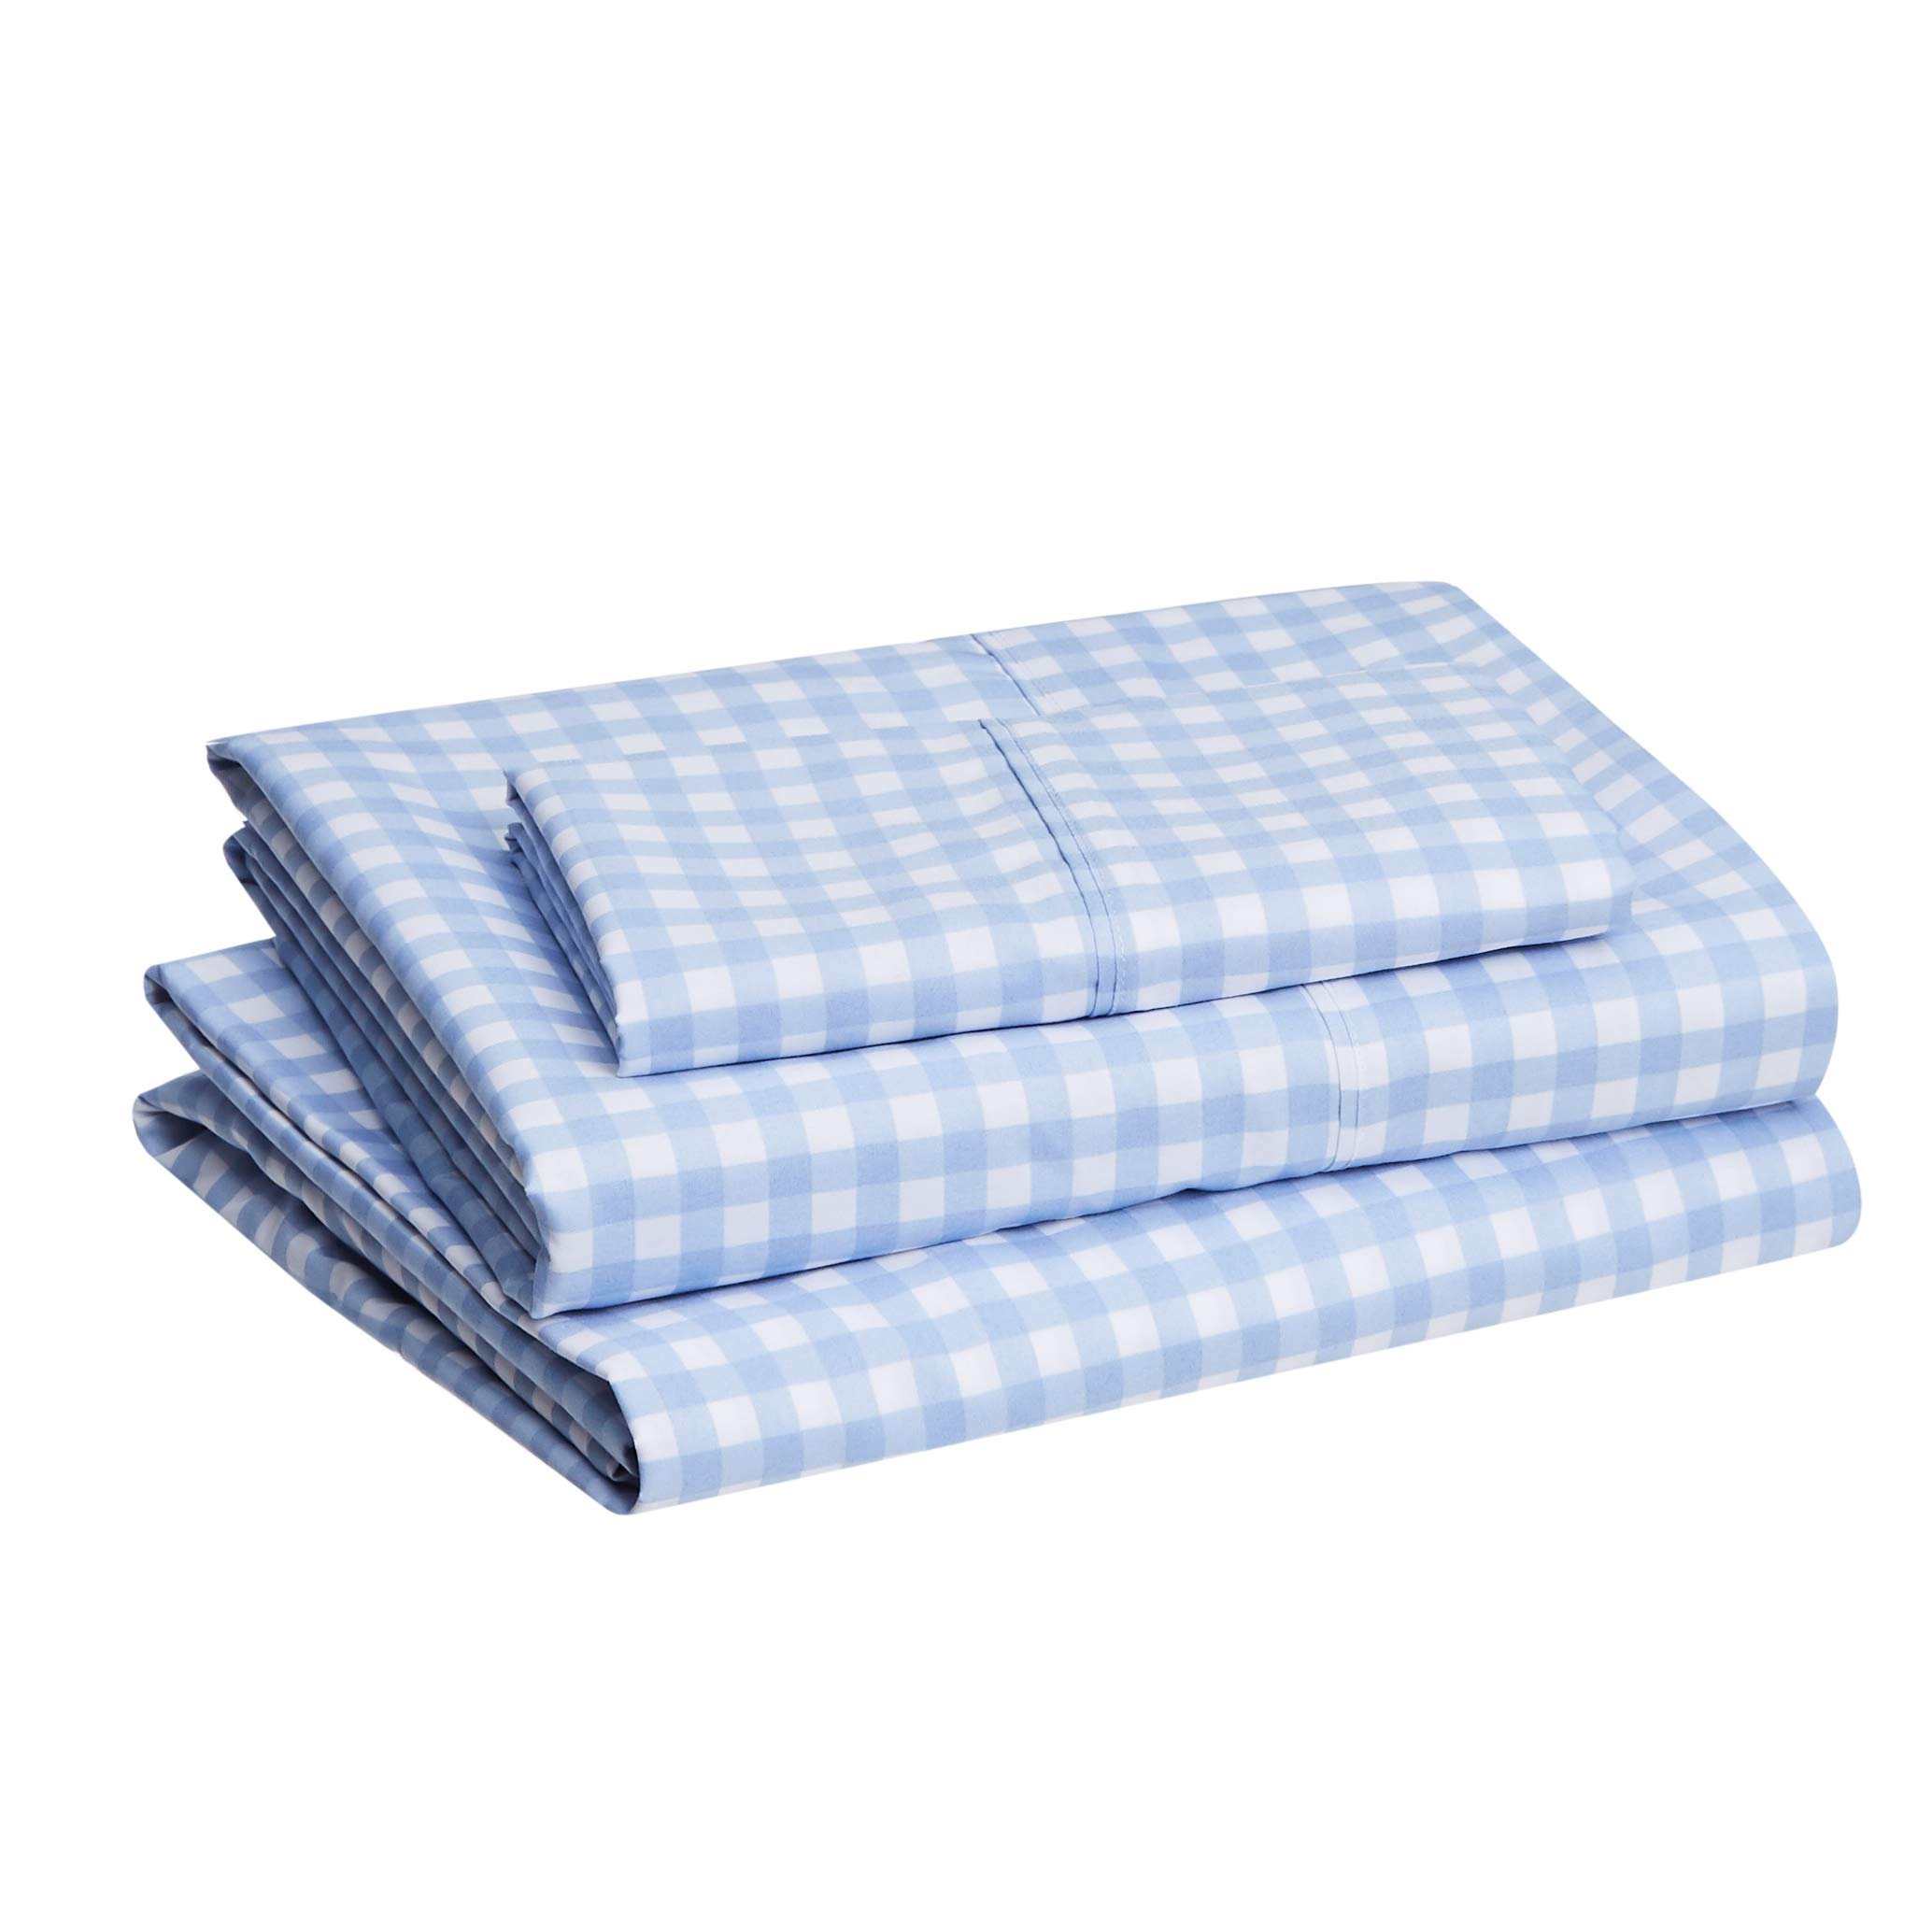 Book Cover Amazon Basics Lightweight Super Soft Easy Care Microfiber Bed Sheet Set with 14” Deep Pockets - Twin, Light Blue Gingham